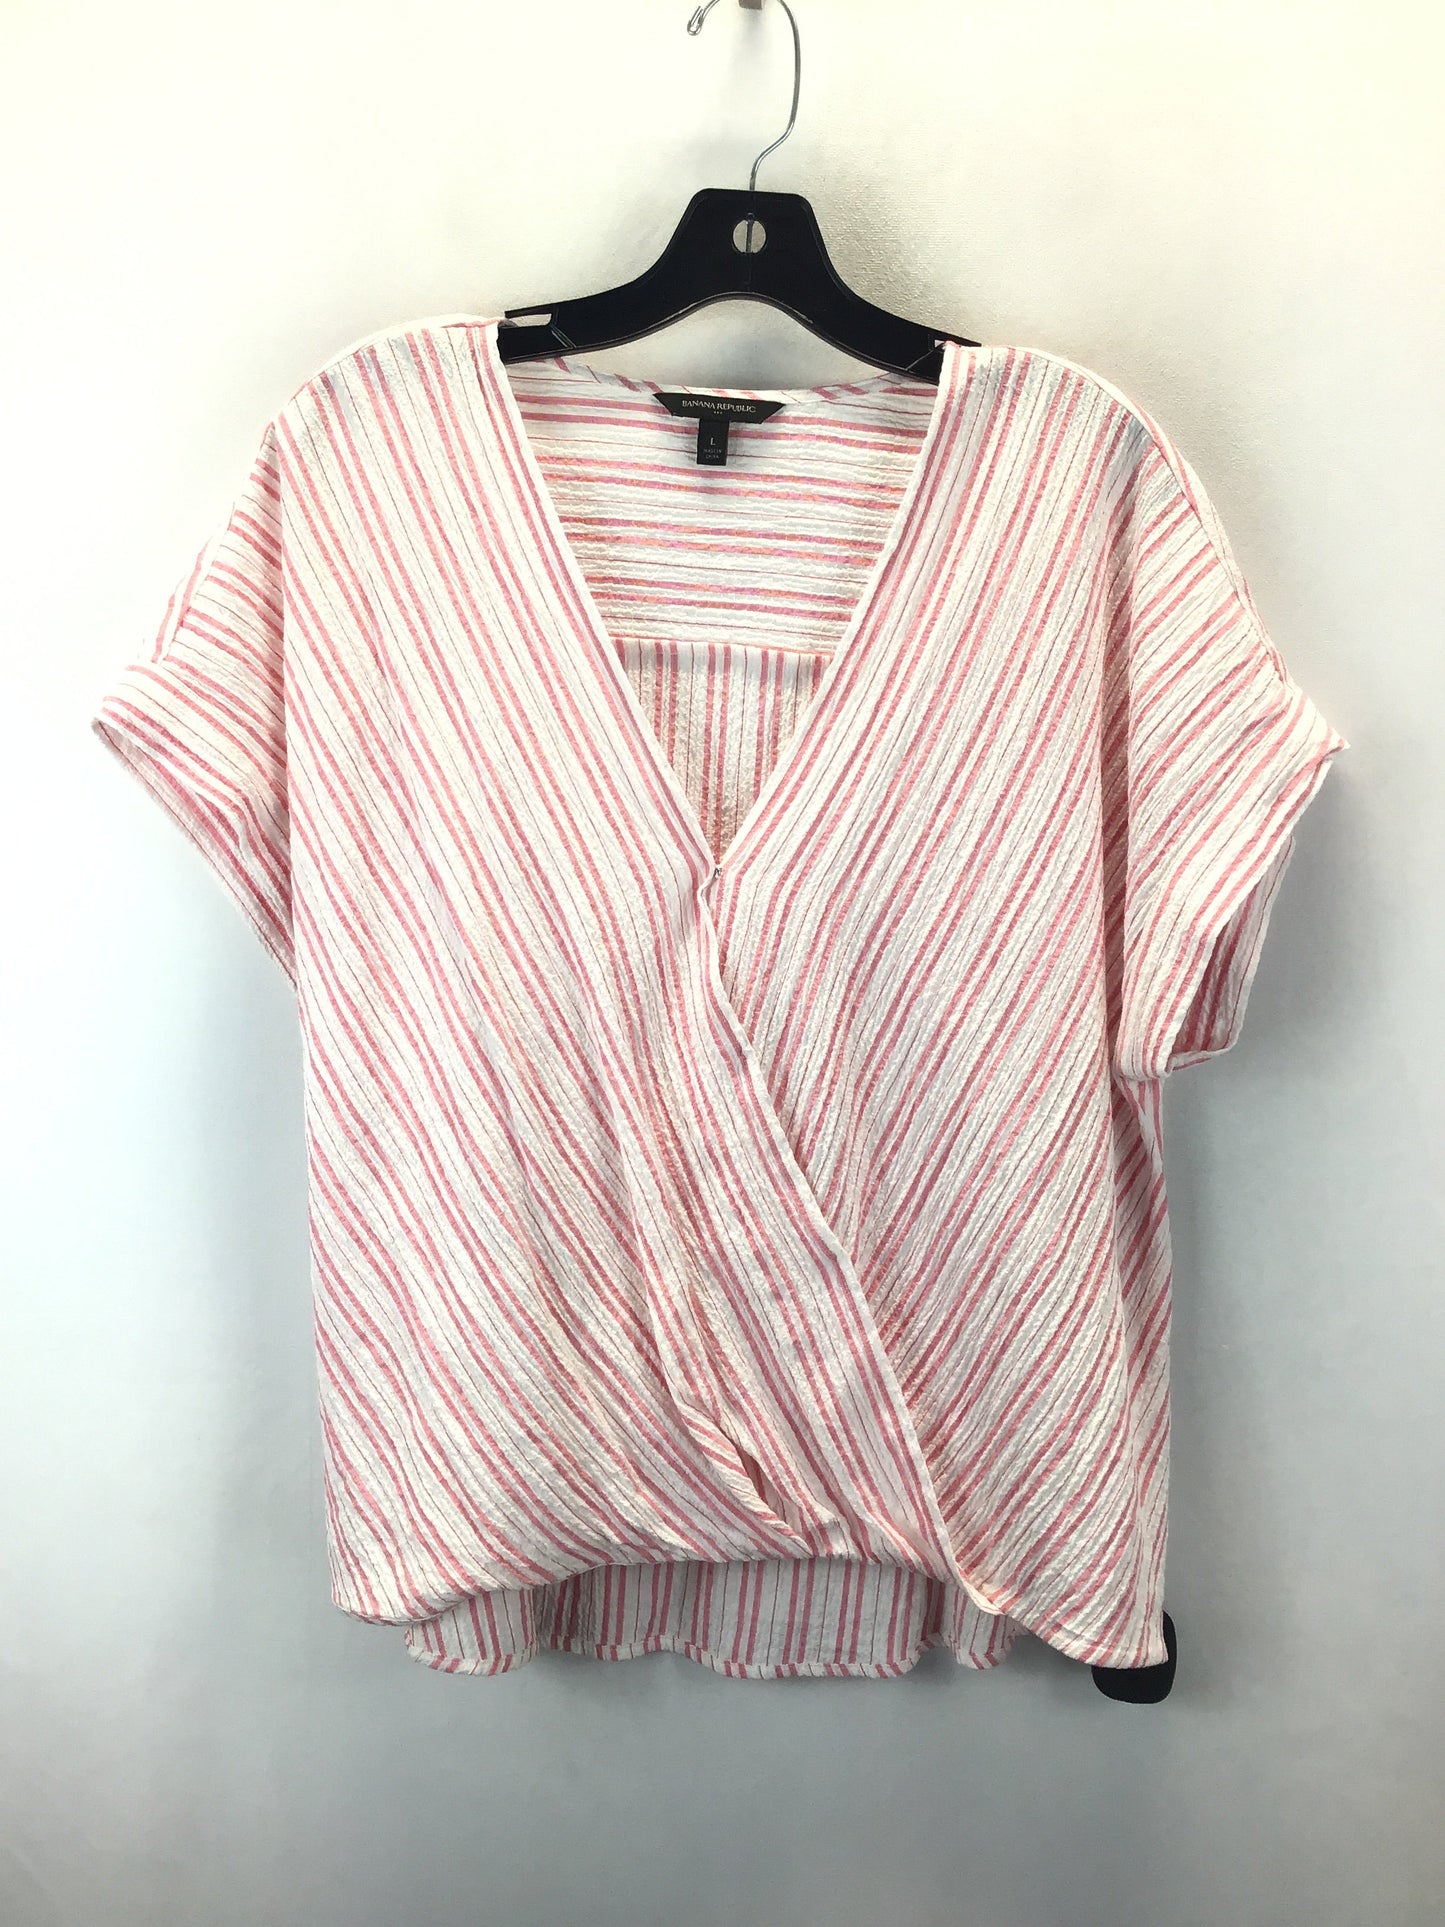 Red White Top Short Sleeve Banana Republic O, Size L